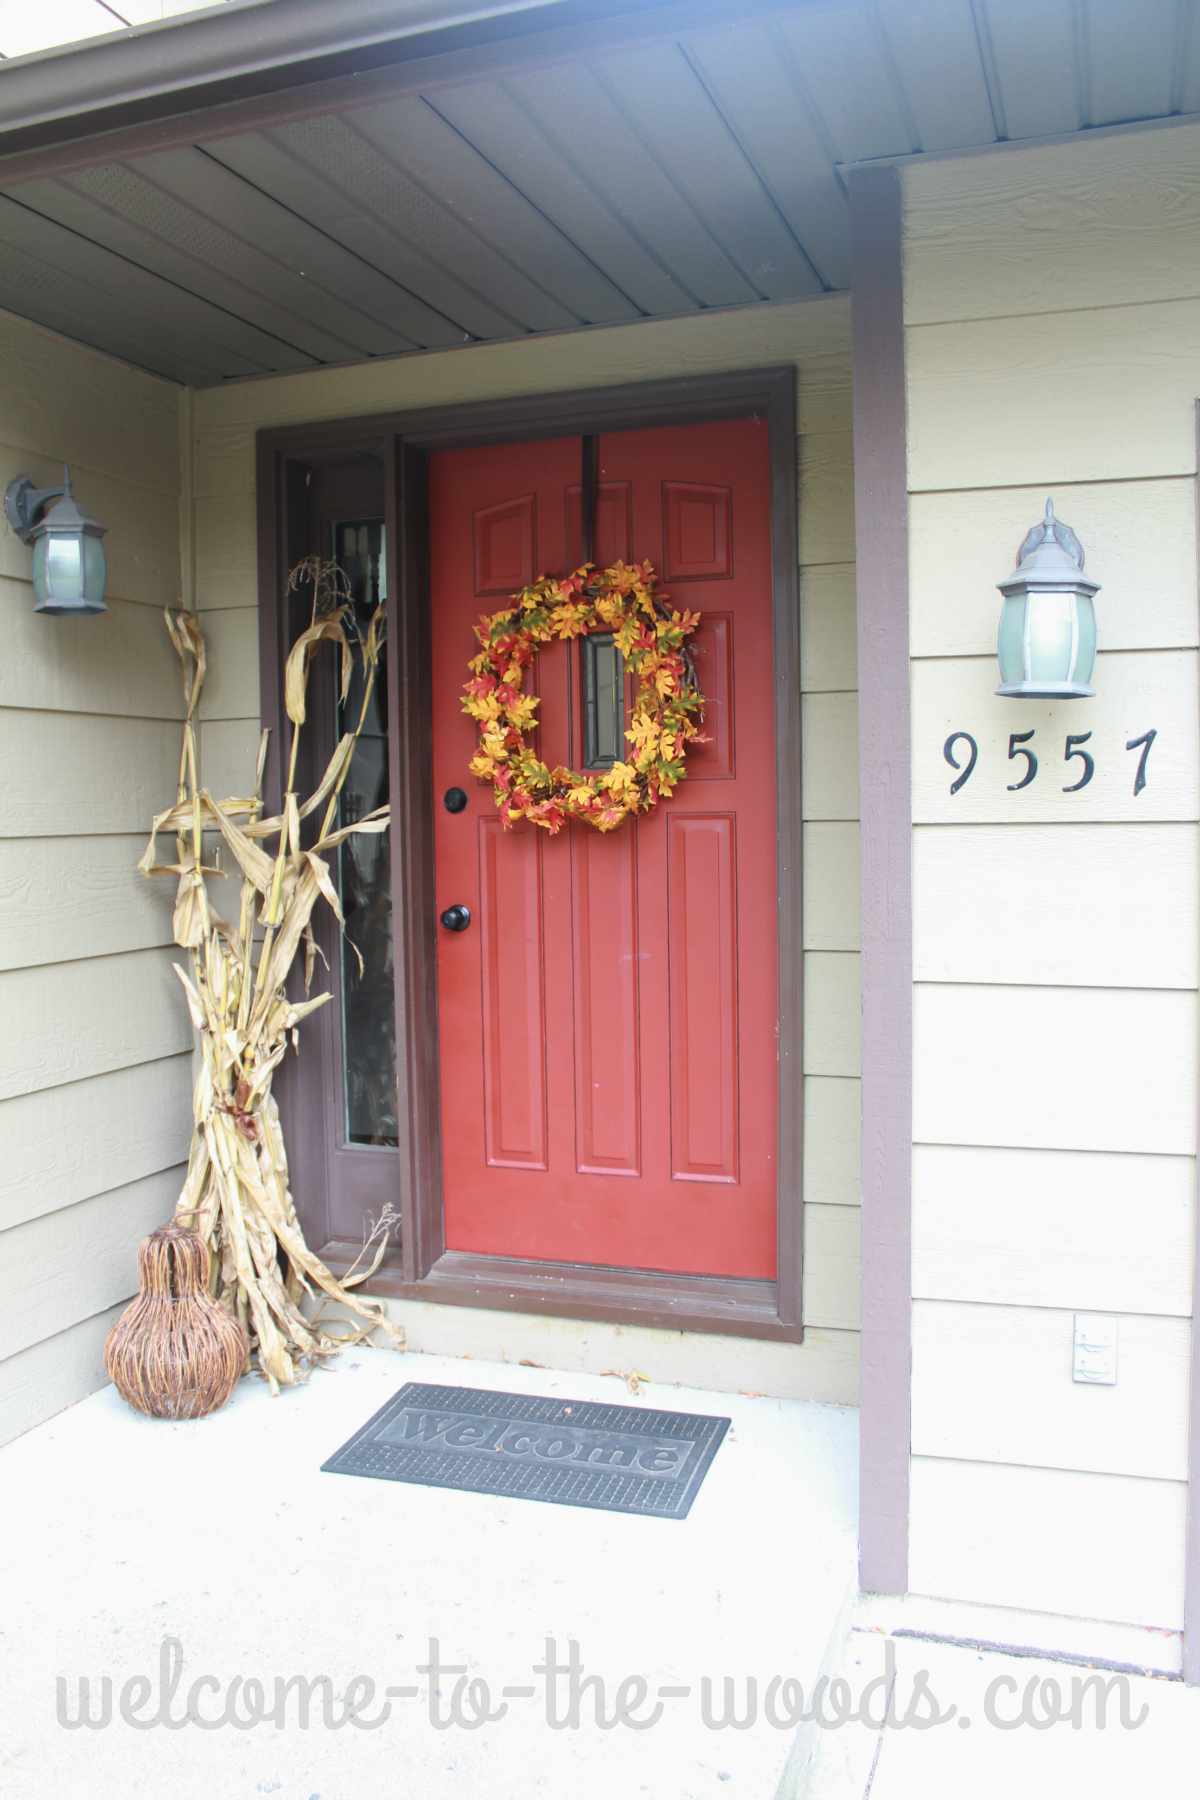 Front entrance autumn decorations. Big wreath of leaves, dry corn stalks, and a grapevine gourd. 